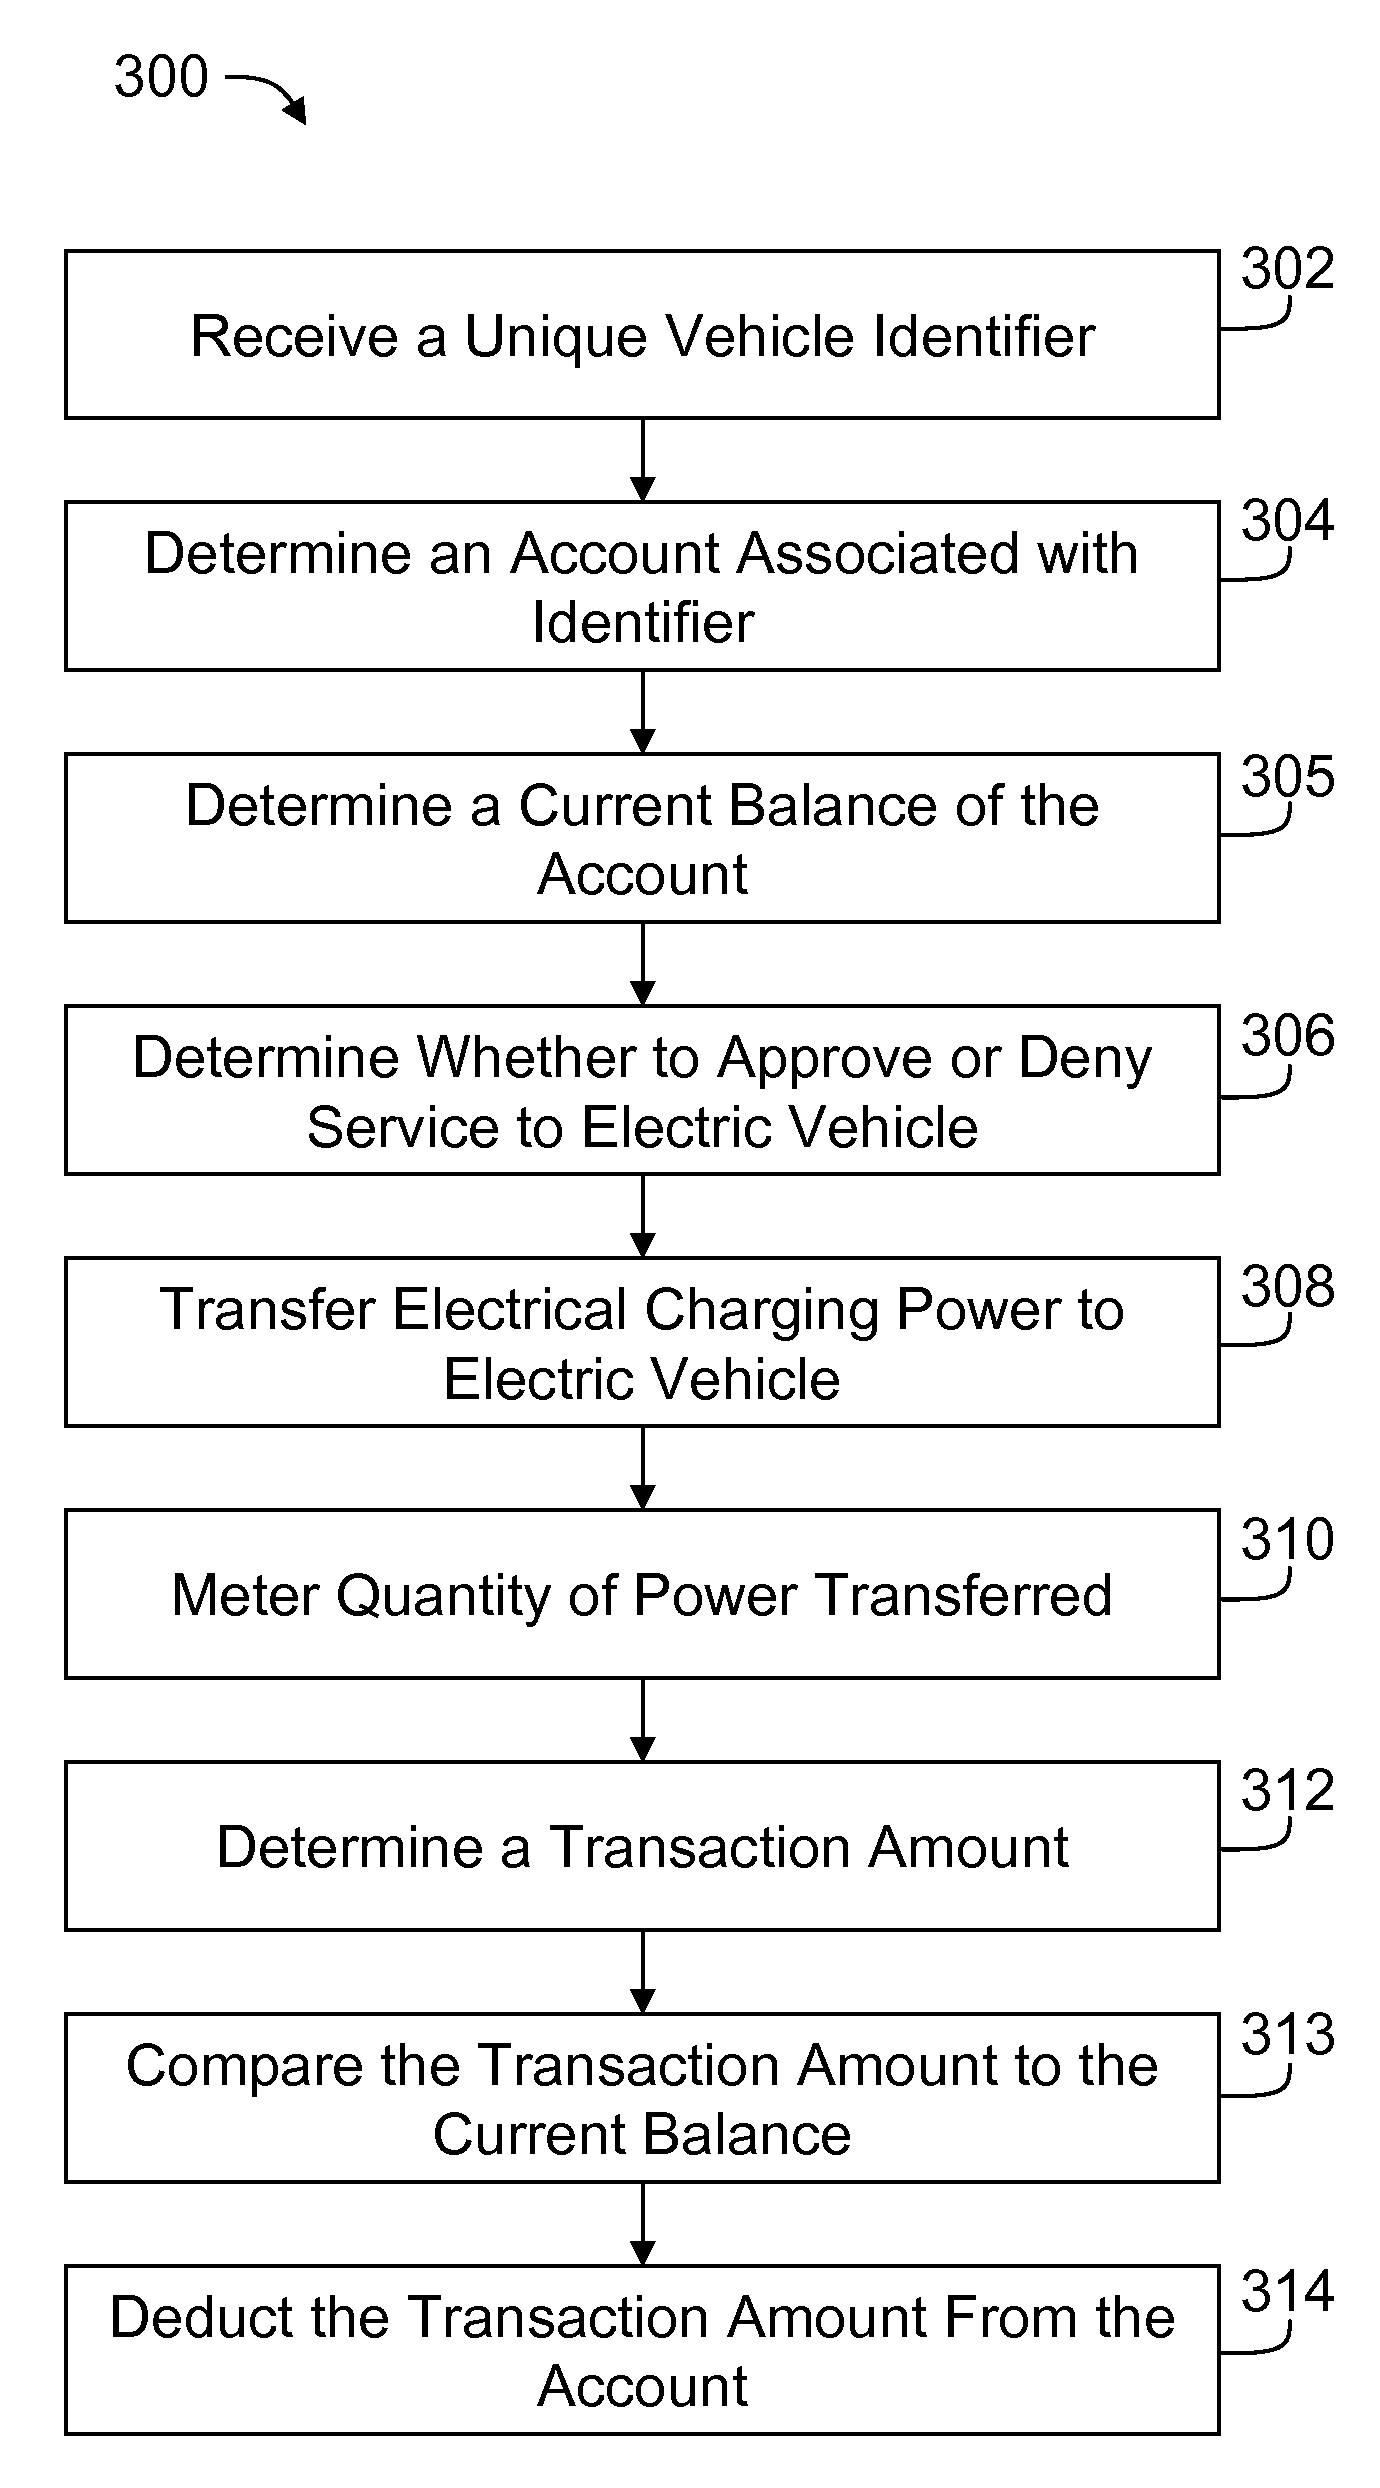 System and method for electric vehicle charging and billing using a wireless vehicle communciation service